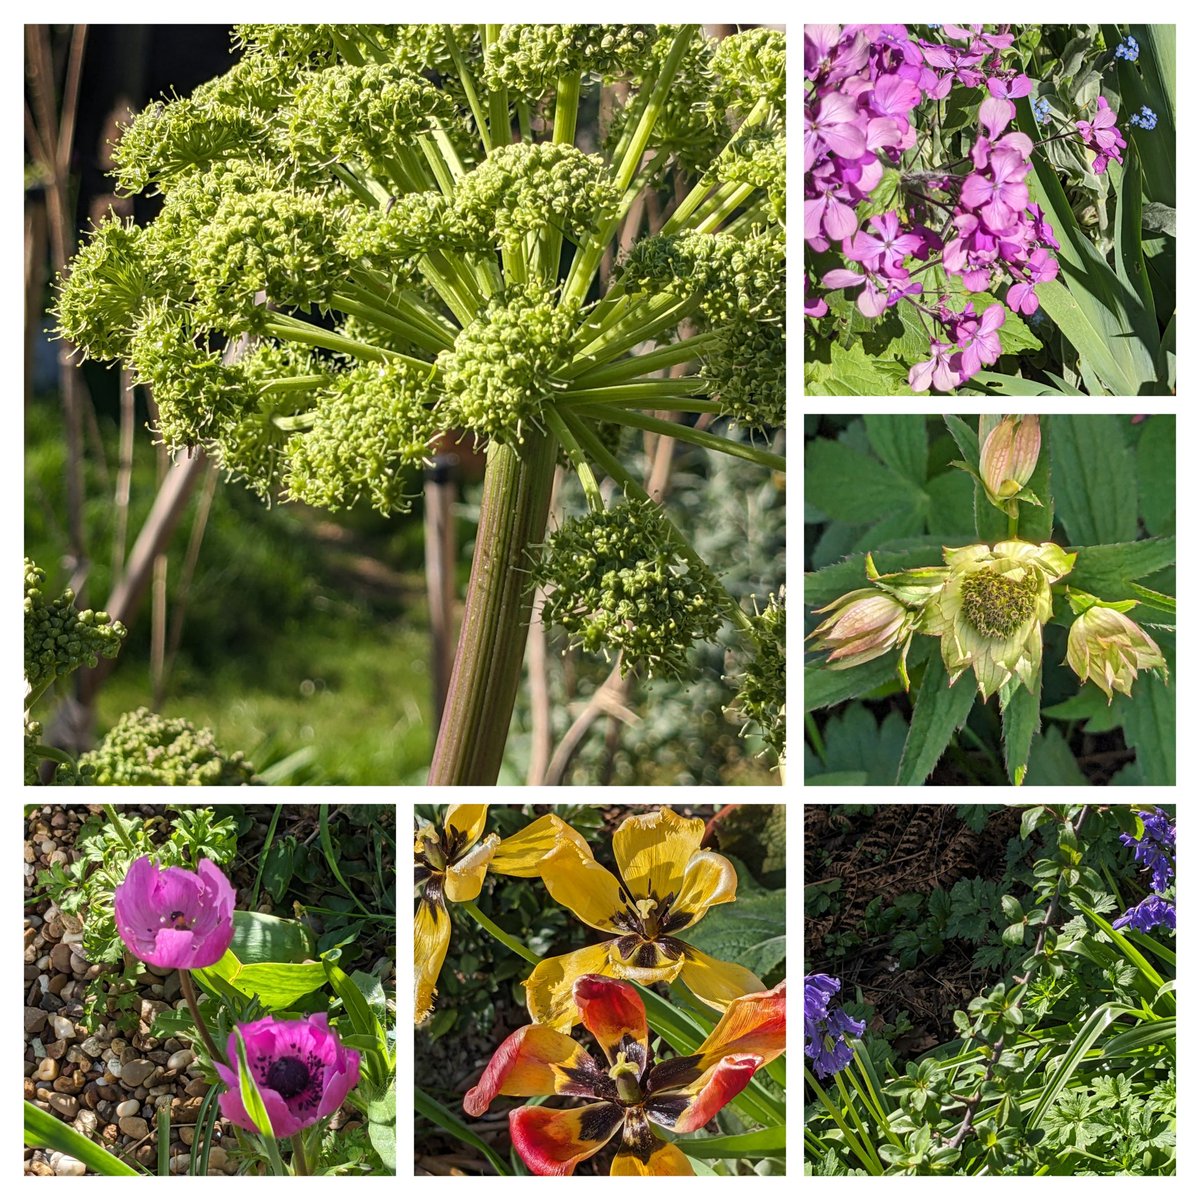 So for #SixOnSaturday, Fennel nearly in flower (hoverflies etc gonna love that ') Erysimum already covered flowers, Astrantia, bluebells on edge of shade, fading tulips & bright anemones. So nice to get some #sun! #insects loving it! @CathHodsman @BBOWT @savebutterflies #bees 🐝